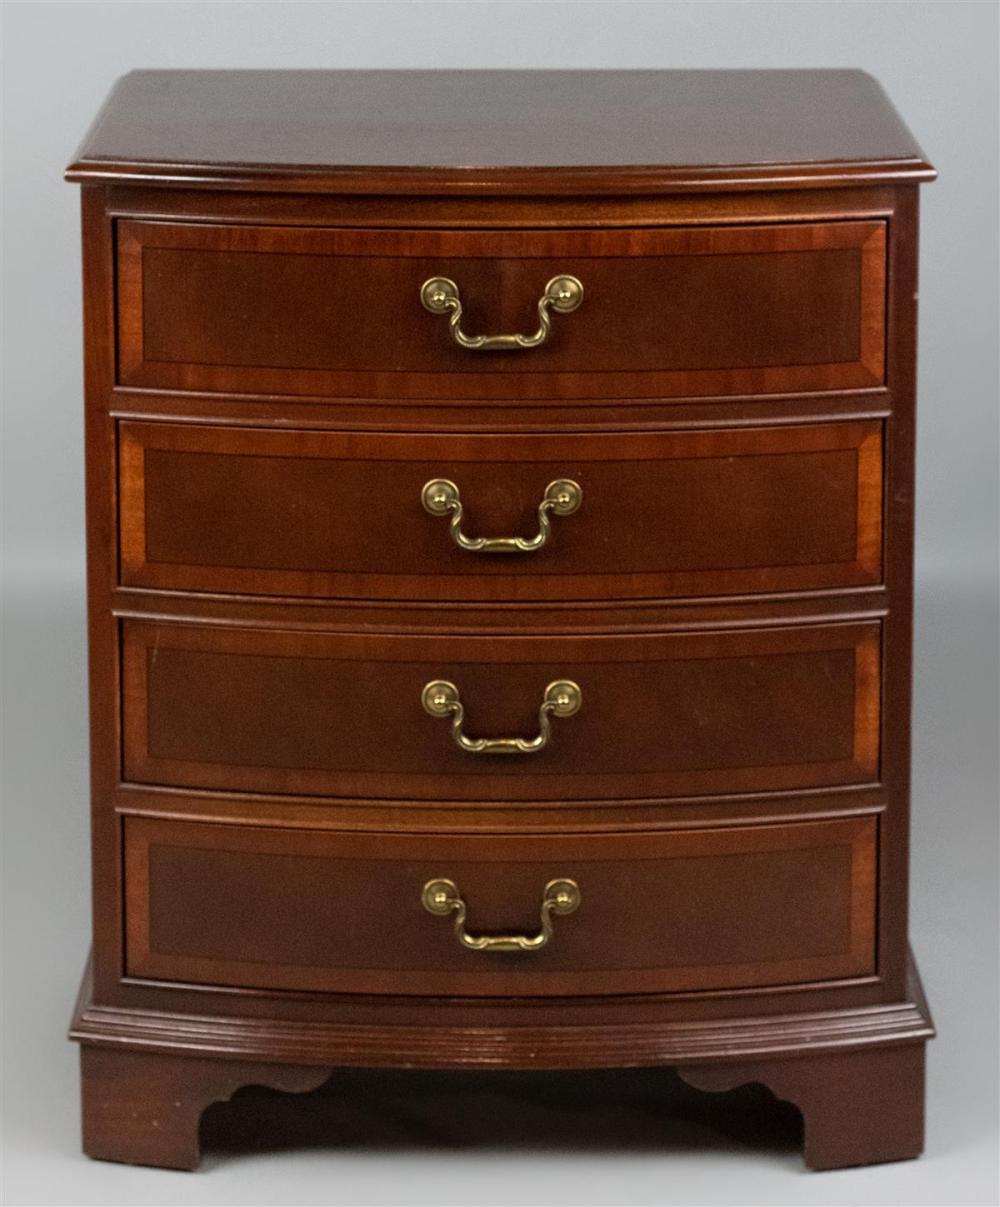 ETHAN ALLEN CHIPPENDALE STYLE MAHOGANY 311cc9